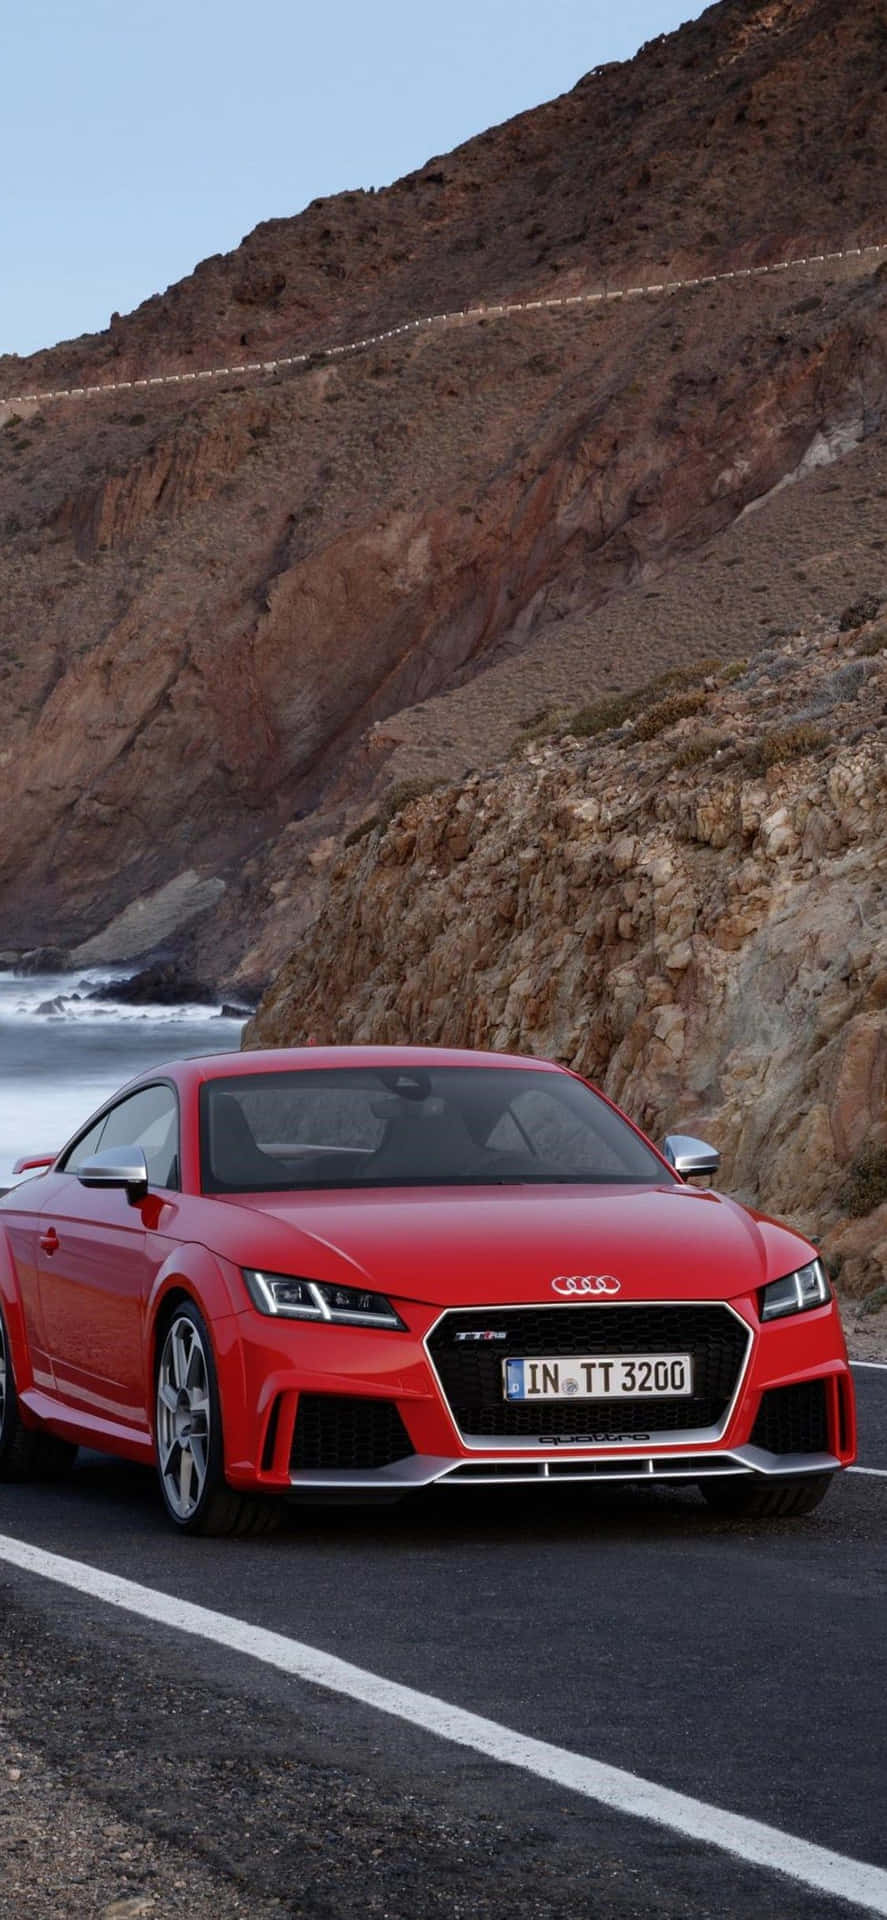 Audi TT 2021 - A Sporty and Stylish Coupe Wallpaper